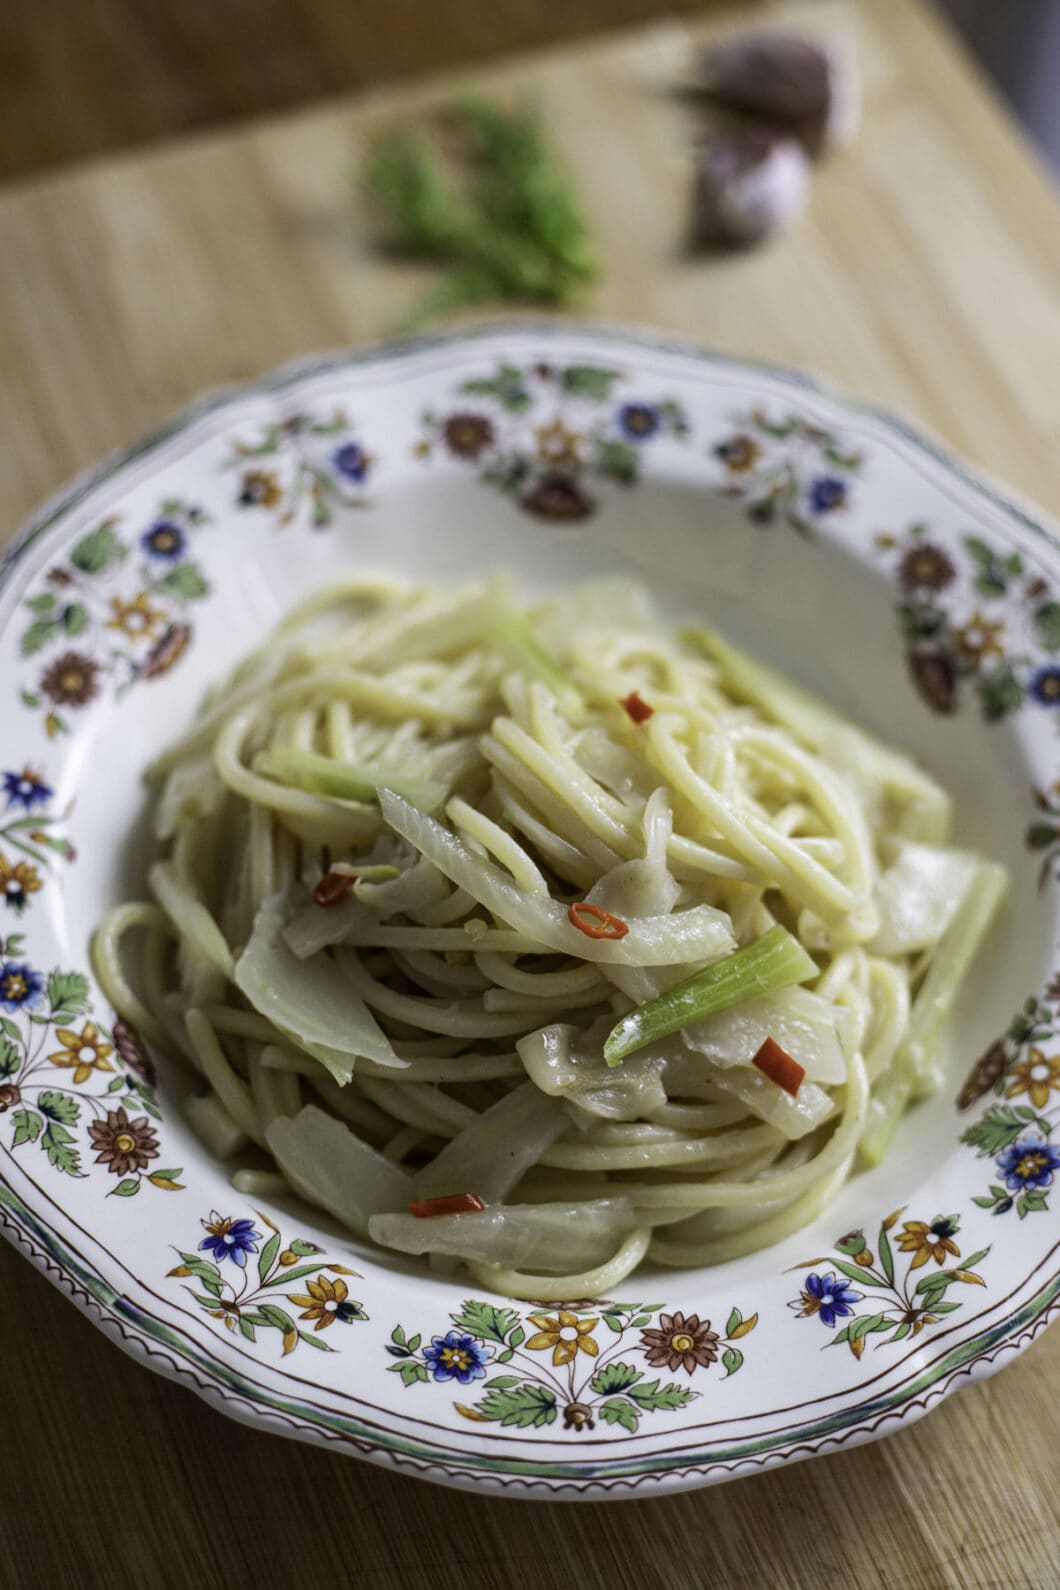 Fennel and anchovies pasta with minced garlic and red pepper